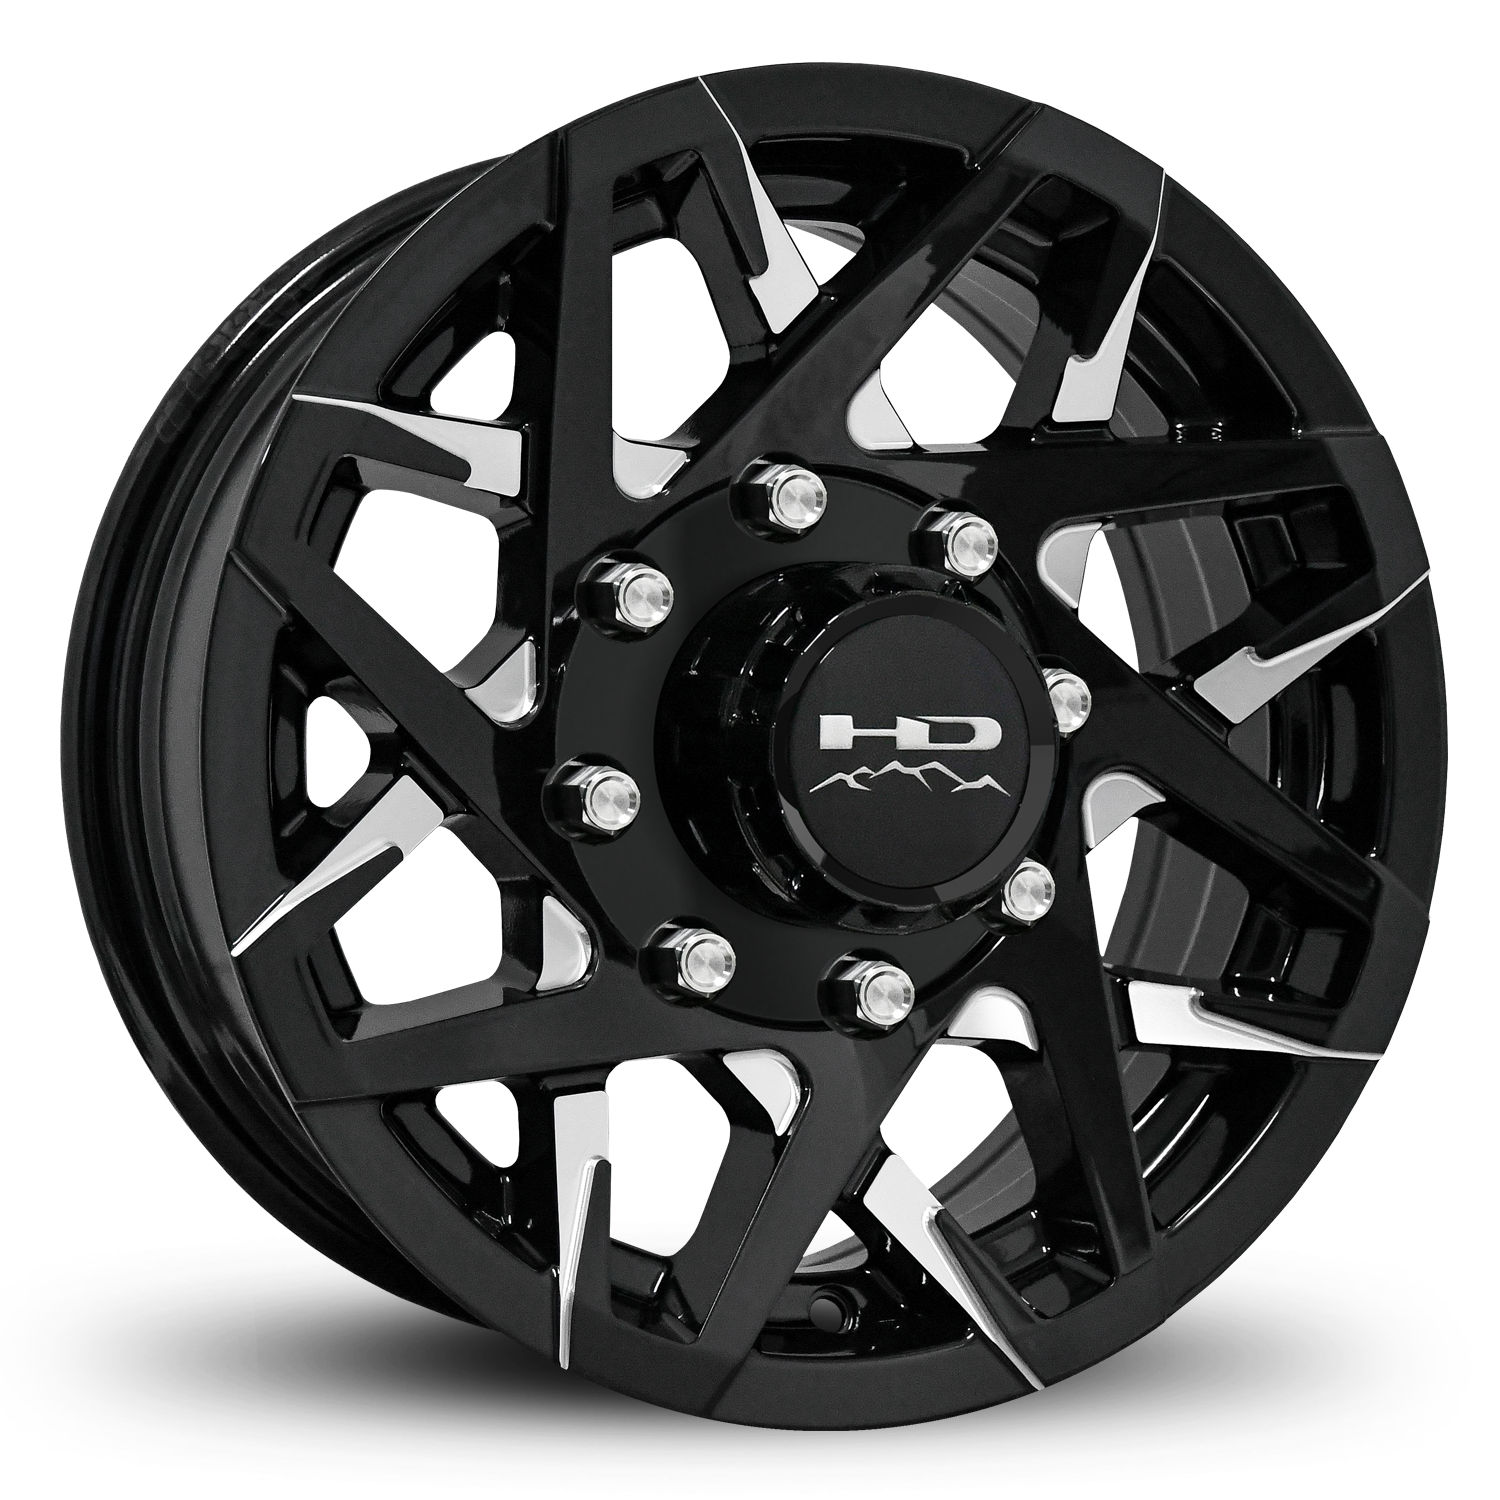 HD Off-Road Canyon Custom Trailer Wheel Rims in 16x6.0 16x6 Gloss Black CNC Milled Face Spokes with Center Cap & Logo fits 8x6.50 / 8x165 Axle Boat, Car, RV, Travel, Concession, Horse, Utility, Lawn & Garden, & Landscaping.